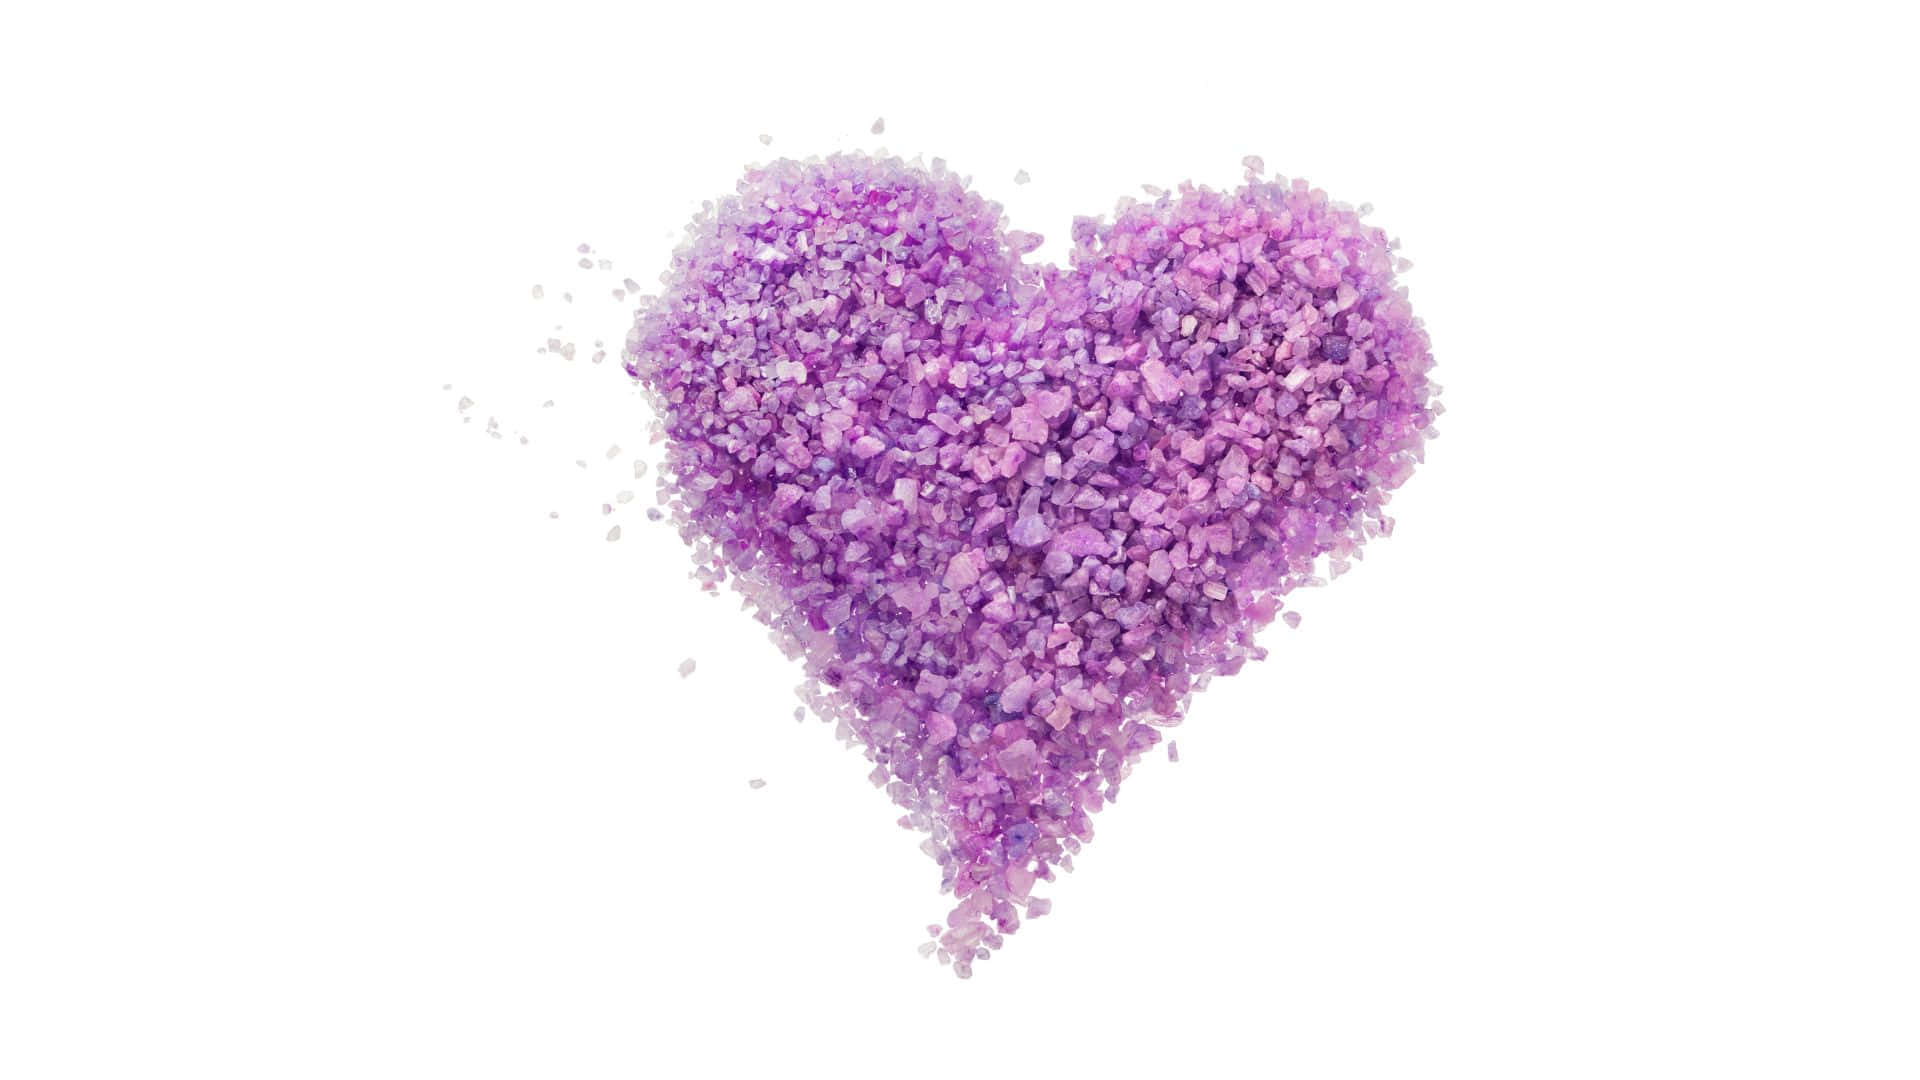 A Heart Made Of Purple Flowers On A White Background